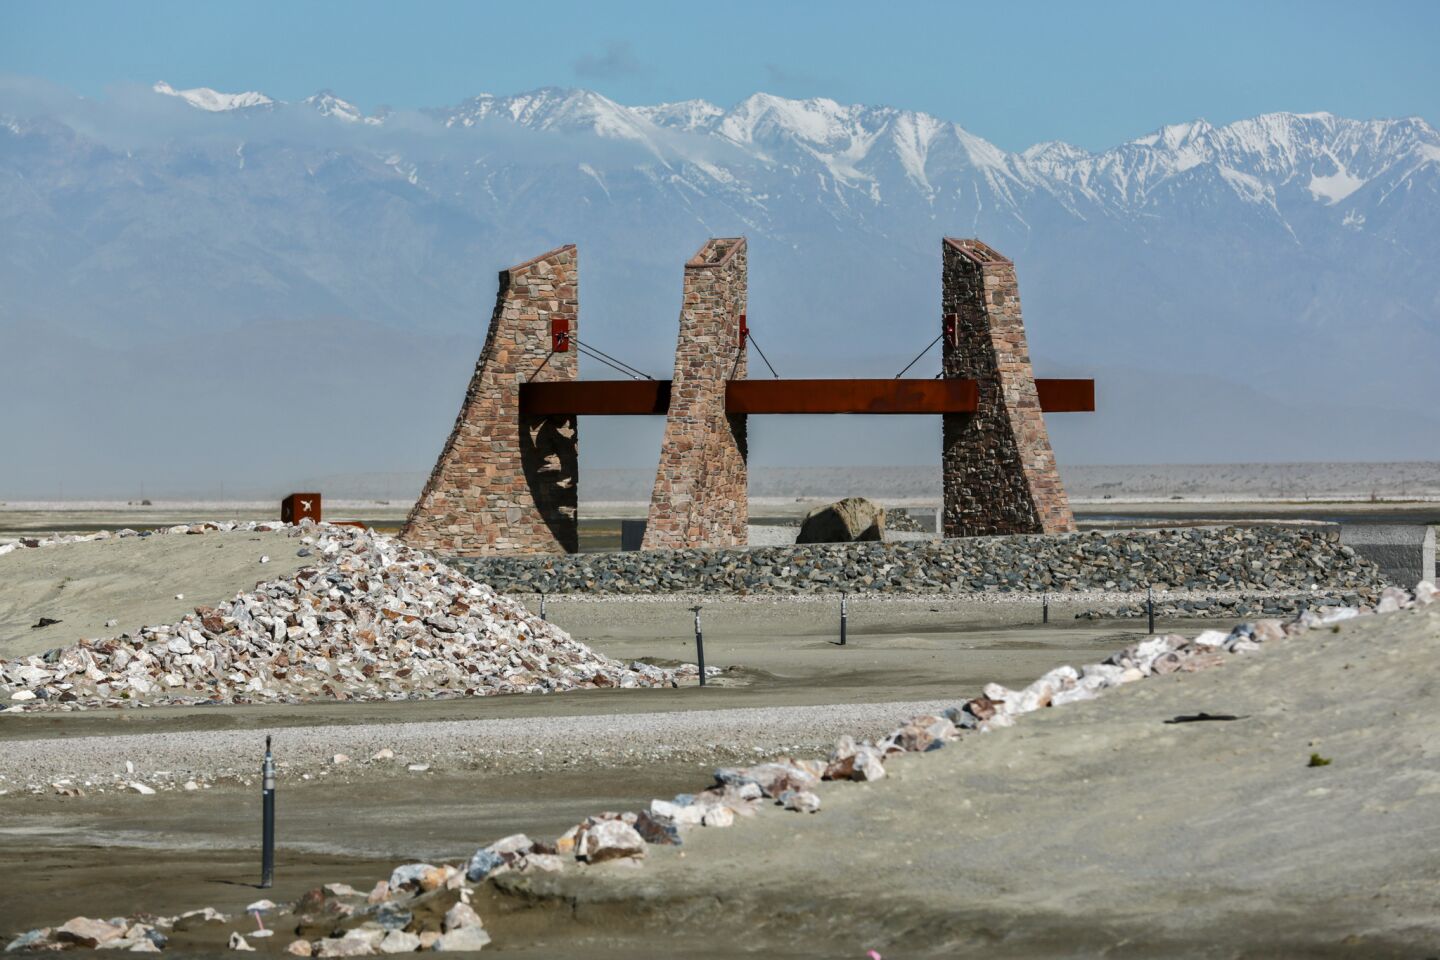 Weekend escape to Lone Pine and Owens Lake Los Angeles Times